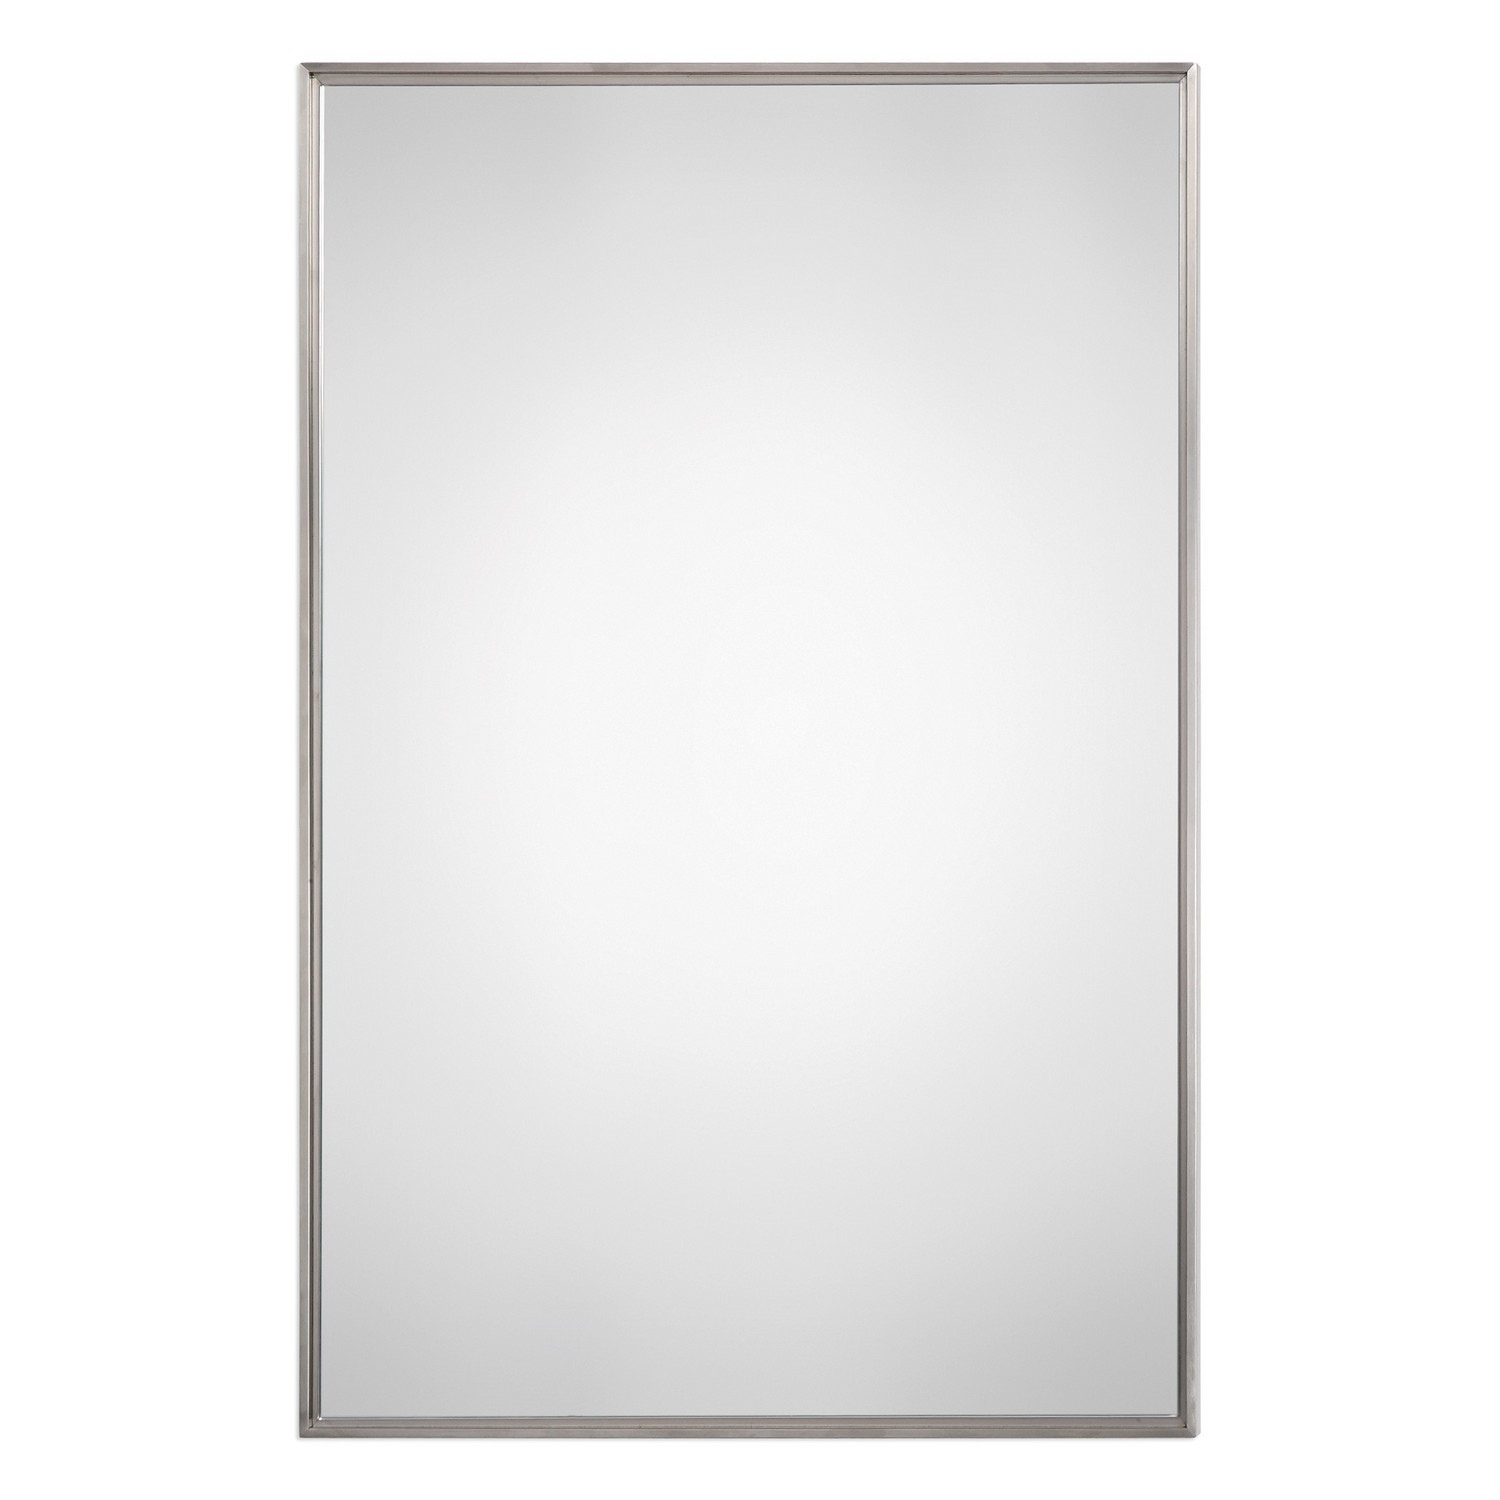 ABC Accent ABC-00411 Mirror - Brushed Stainless Steel